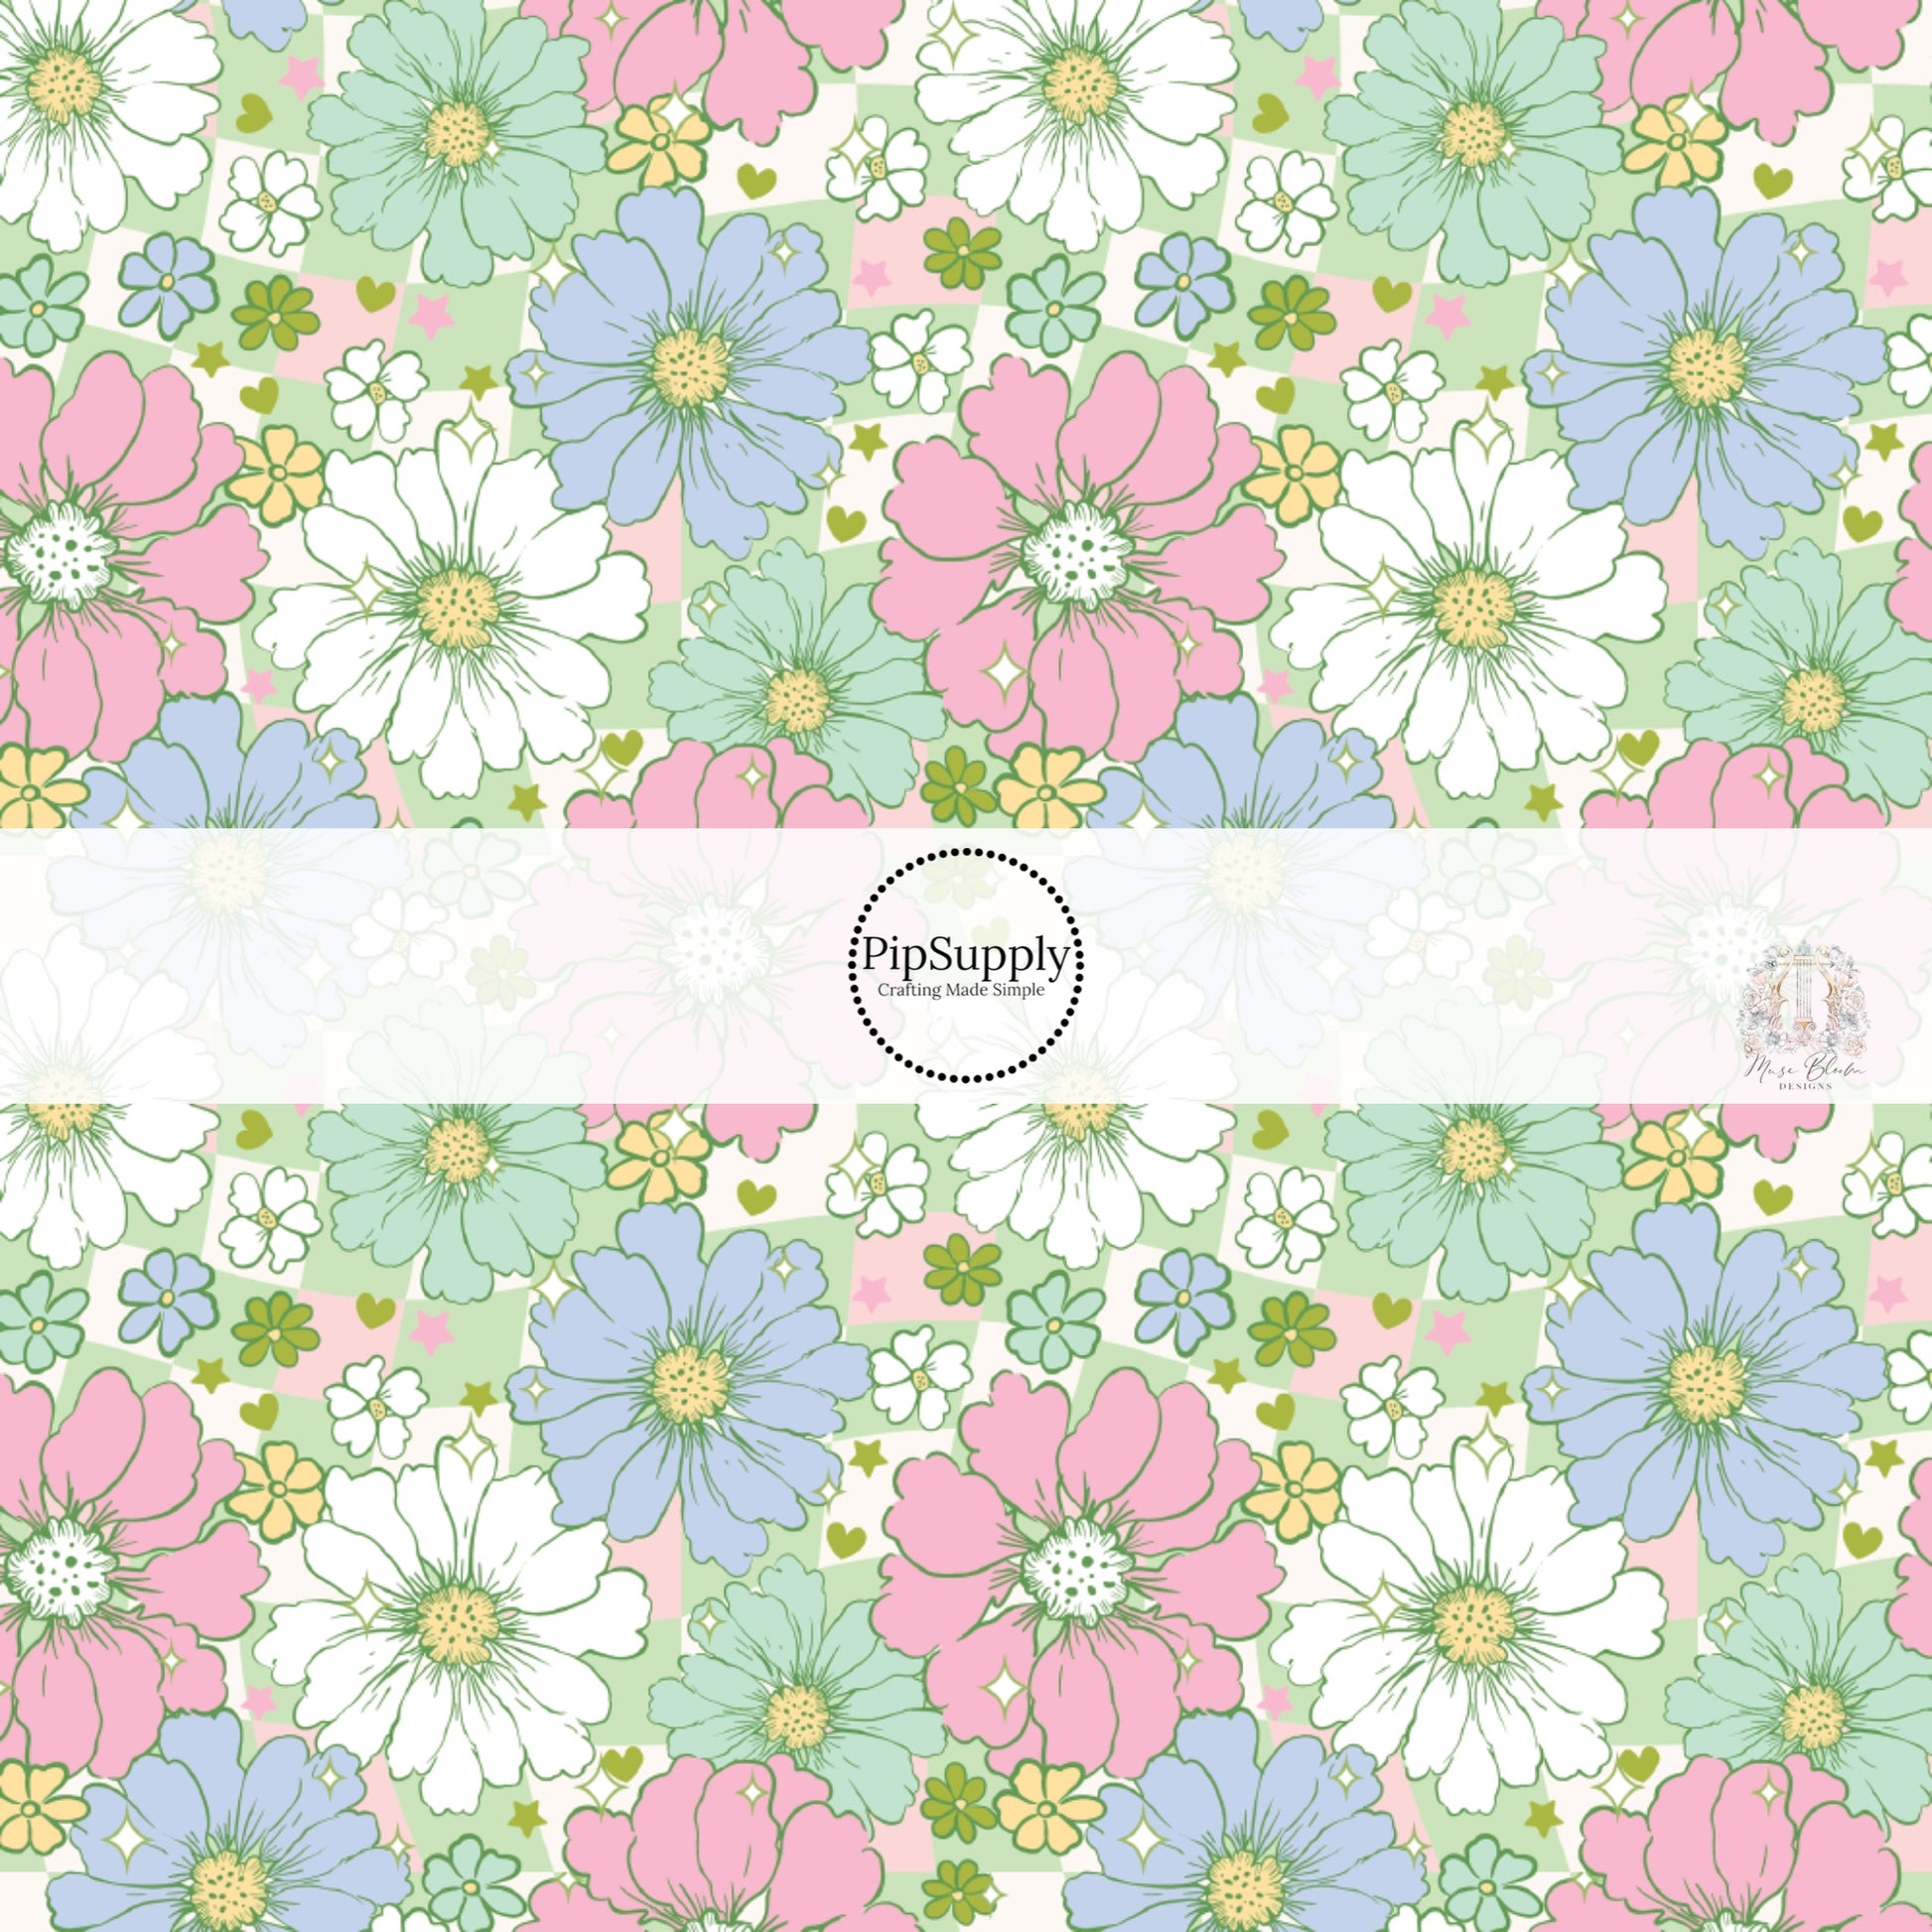 Pastel colors in pink, green, blue, and white flowers of various sizes on a green and pink and cream checkered pattern hair bow strips.